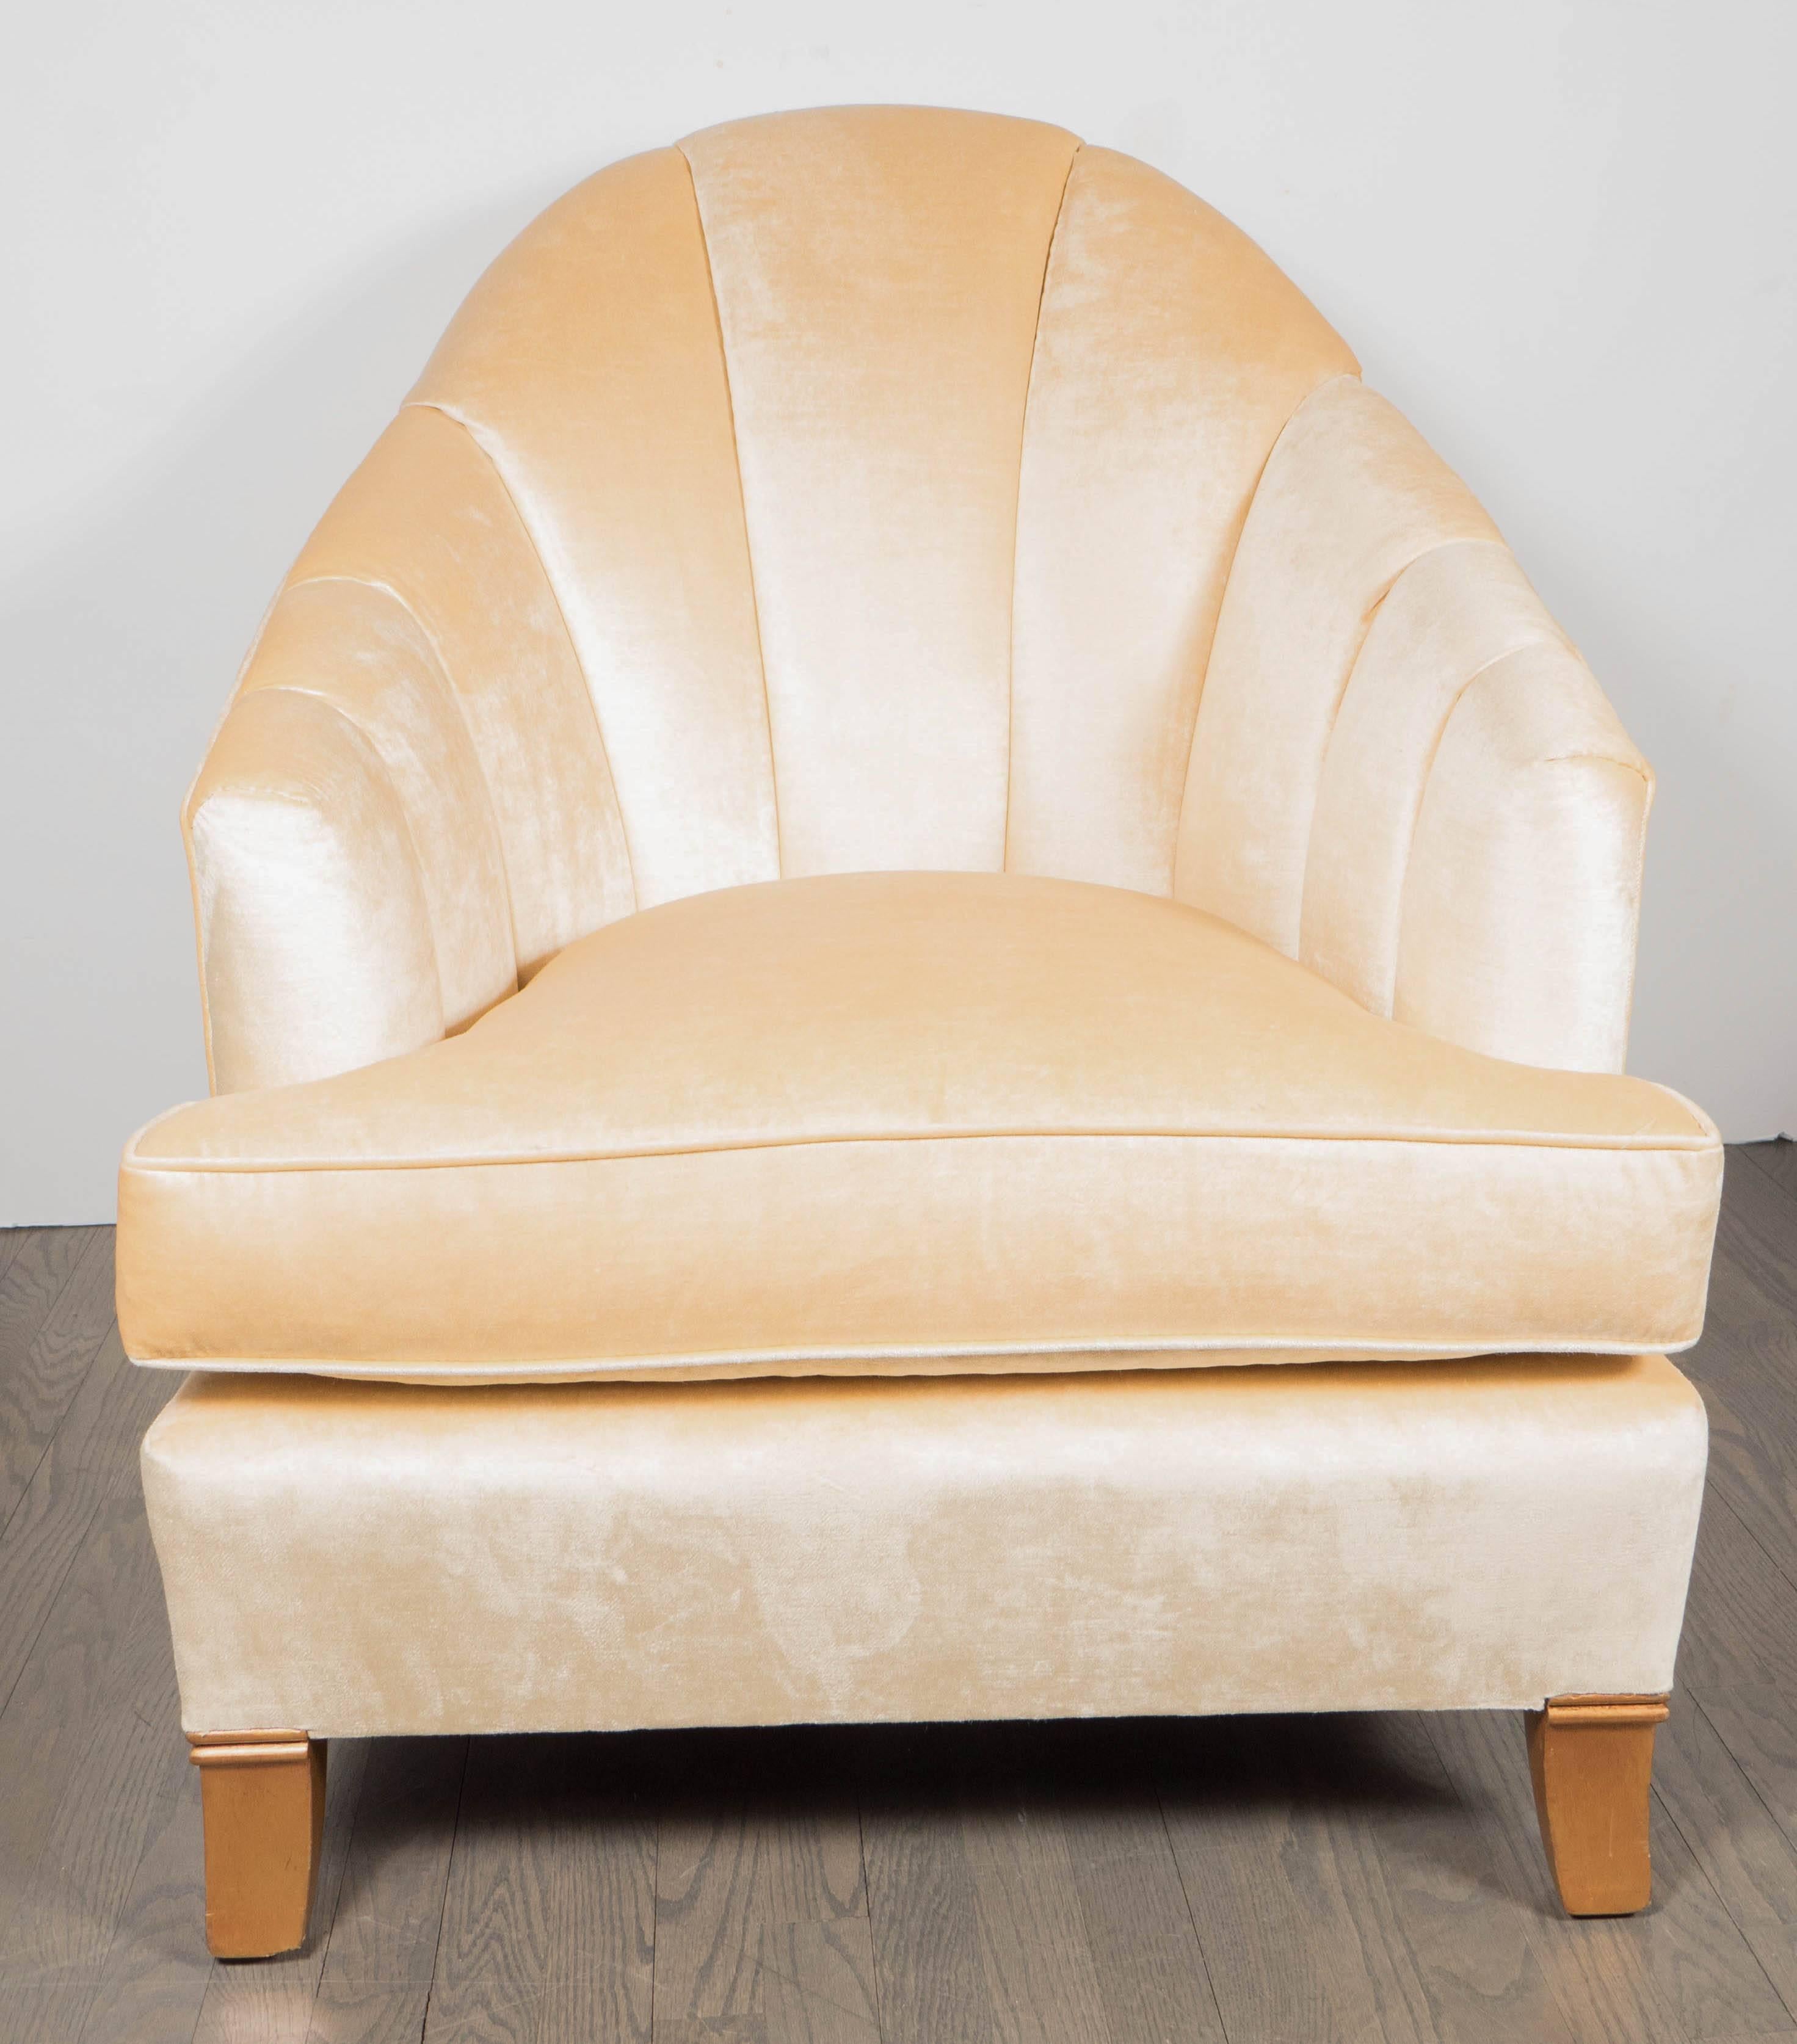 An elegant pair of French Art Deco club chairs with channel-back detailing. Newly upholstered in a cream oyster velvet fabric. Two rear-splayed and two front slightly-tapered walnut feet support each piece. A curved back and sloping arms make for a